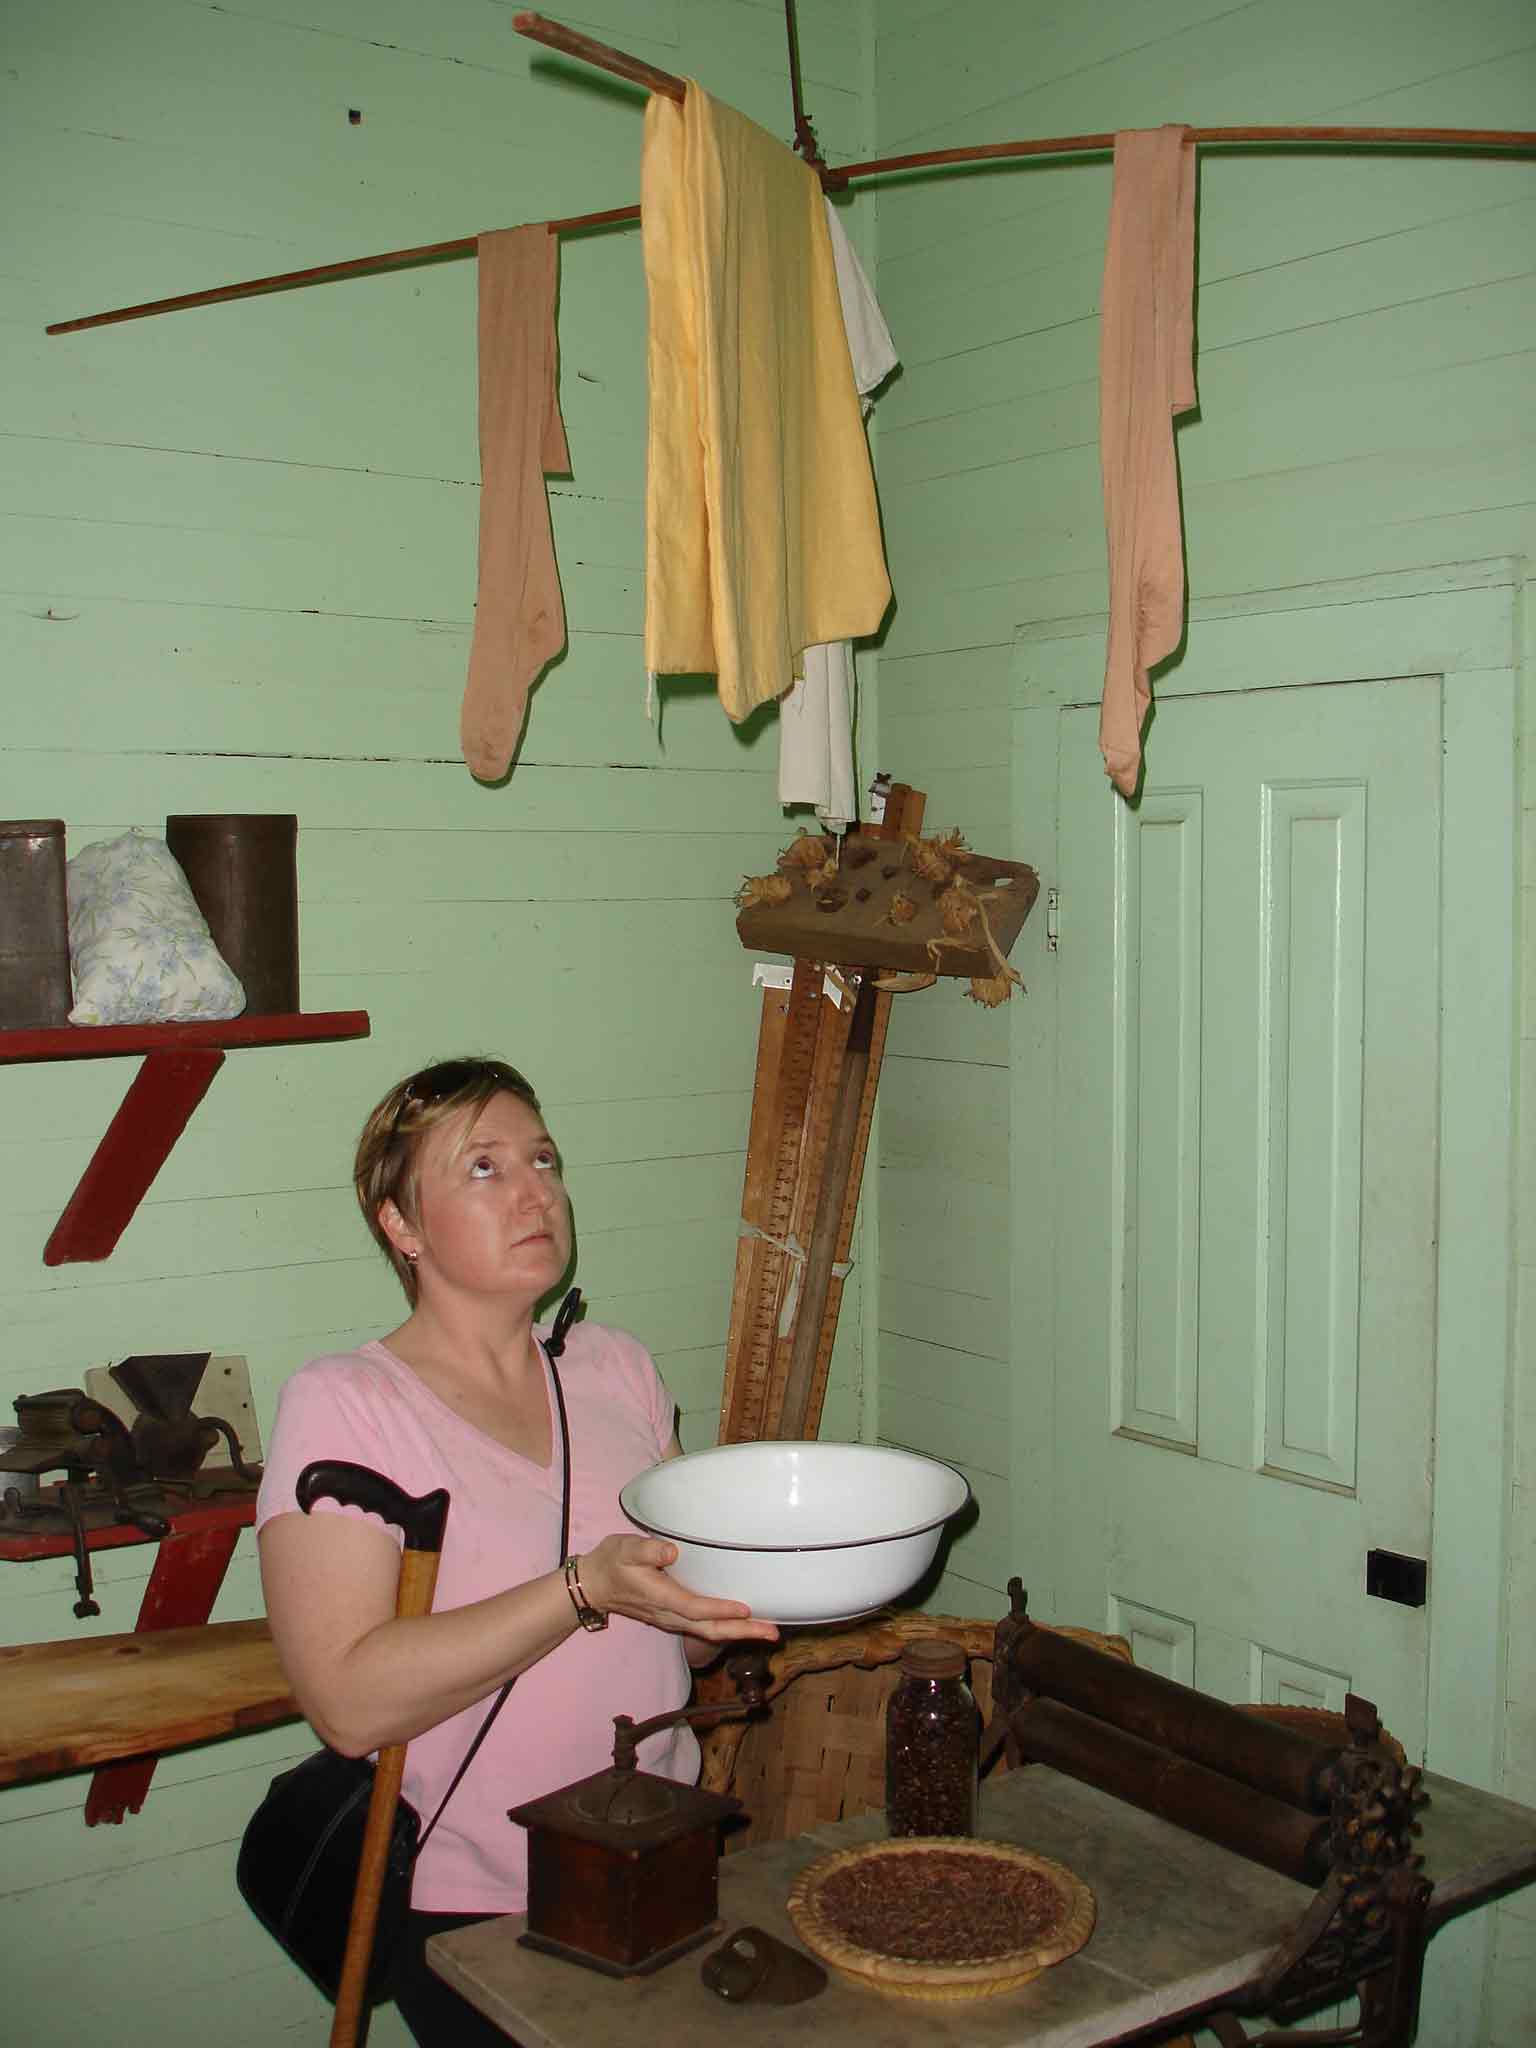 Carrie holding a washing bowl beneath clothes hanging out to dry in the slave home